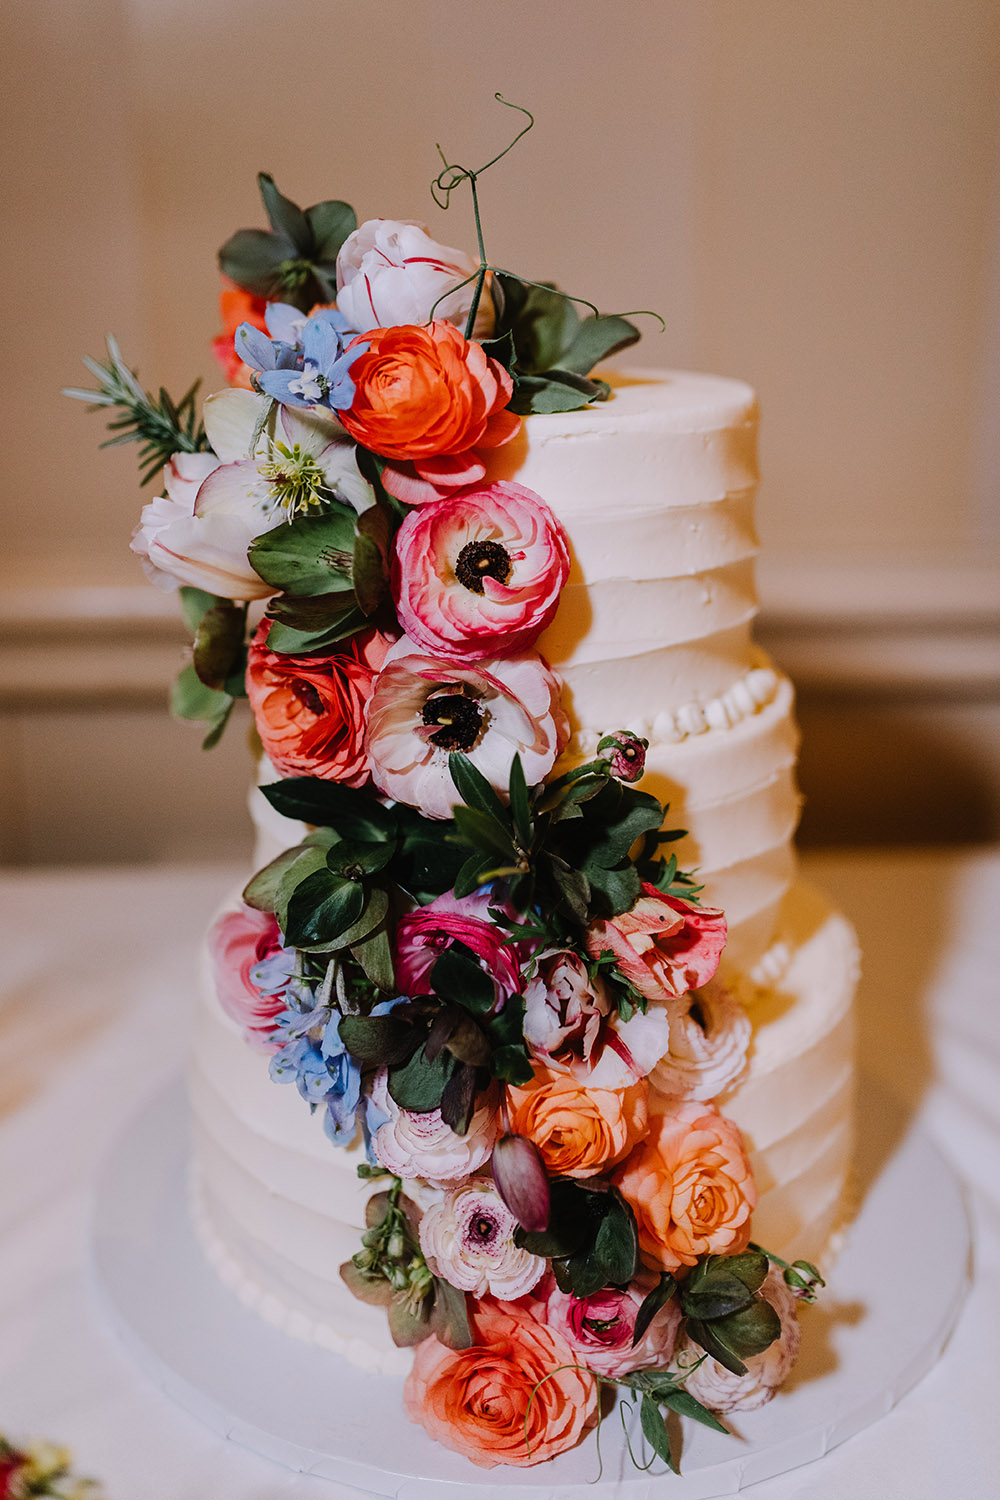 Del and Peter's wedding cake from Bywater Bakery. Photo: Ashley Biltz